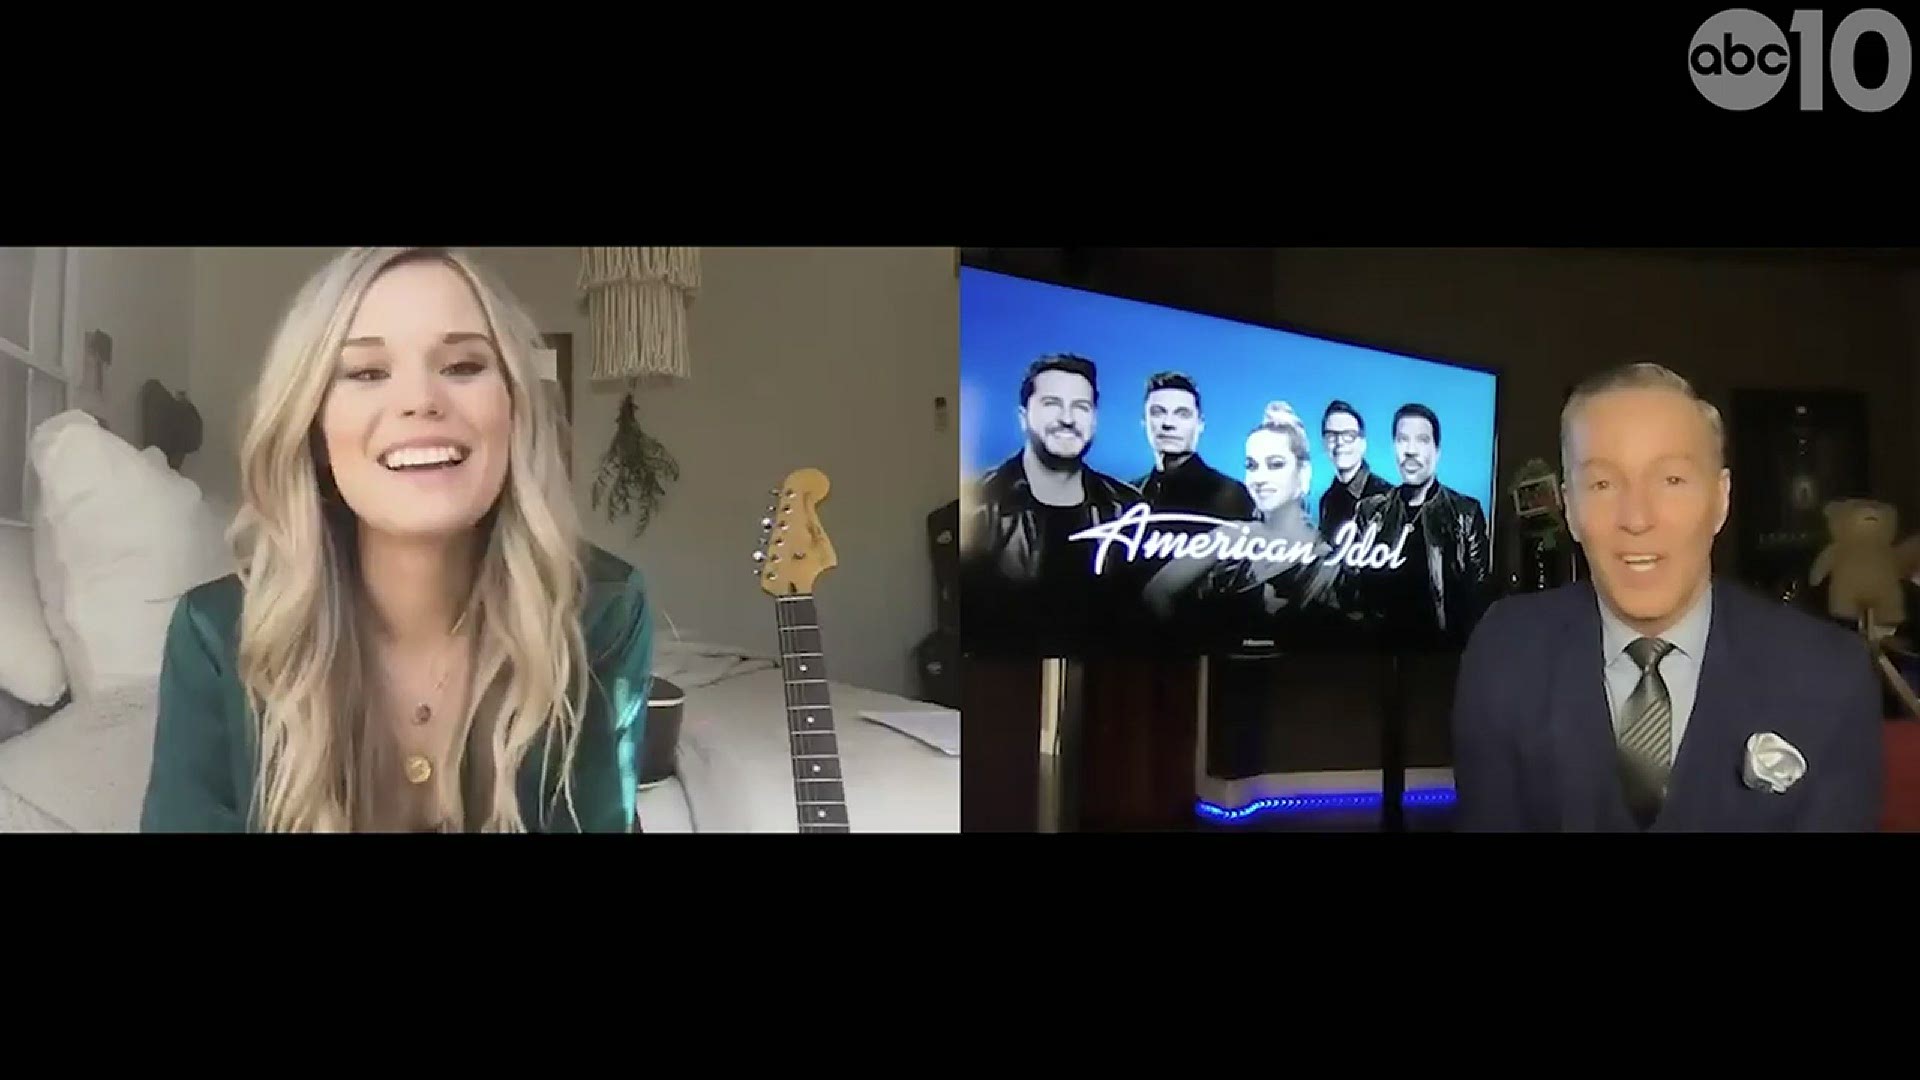 Ashlyn Ruder was on a trip to Yellowstone National Park and out of cellphone range when American Idol producers were trying to tell her she got the spot on the show.